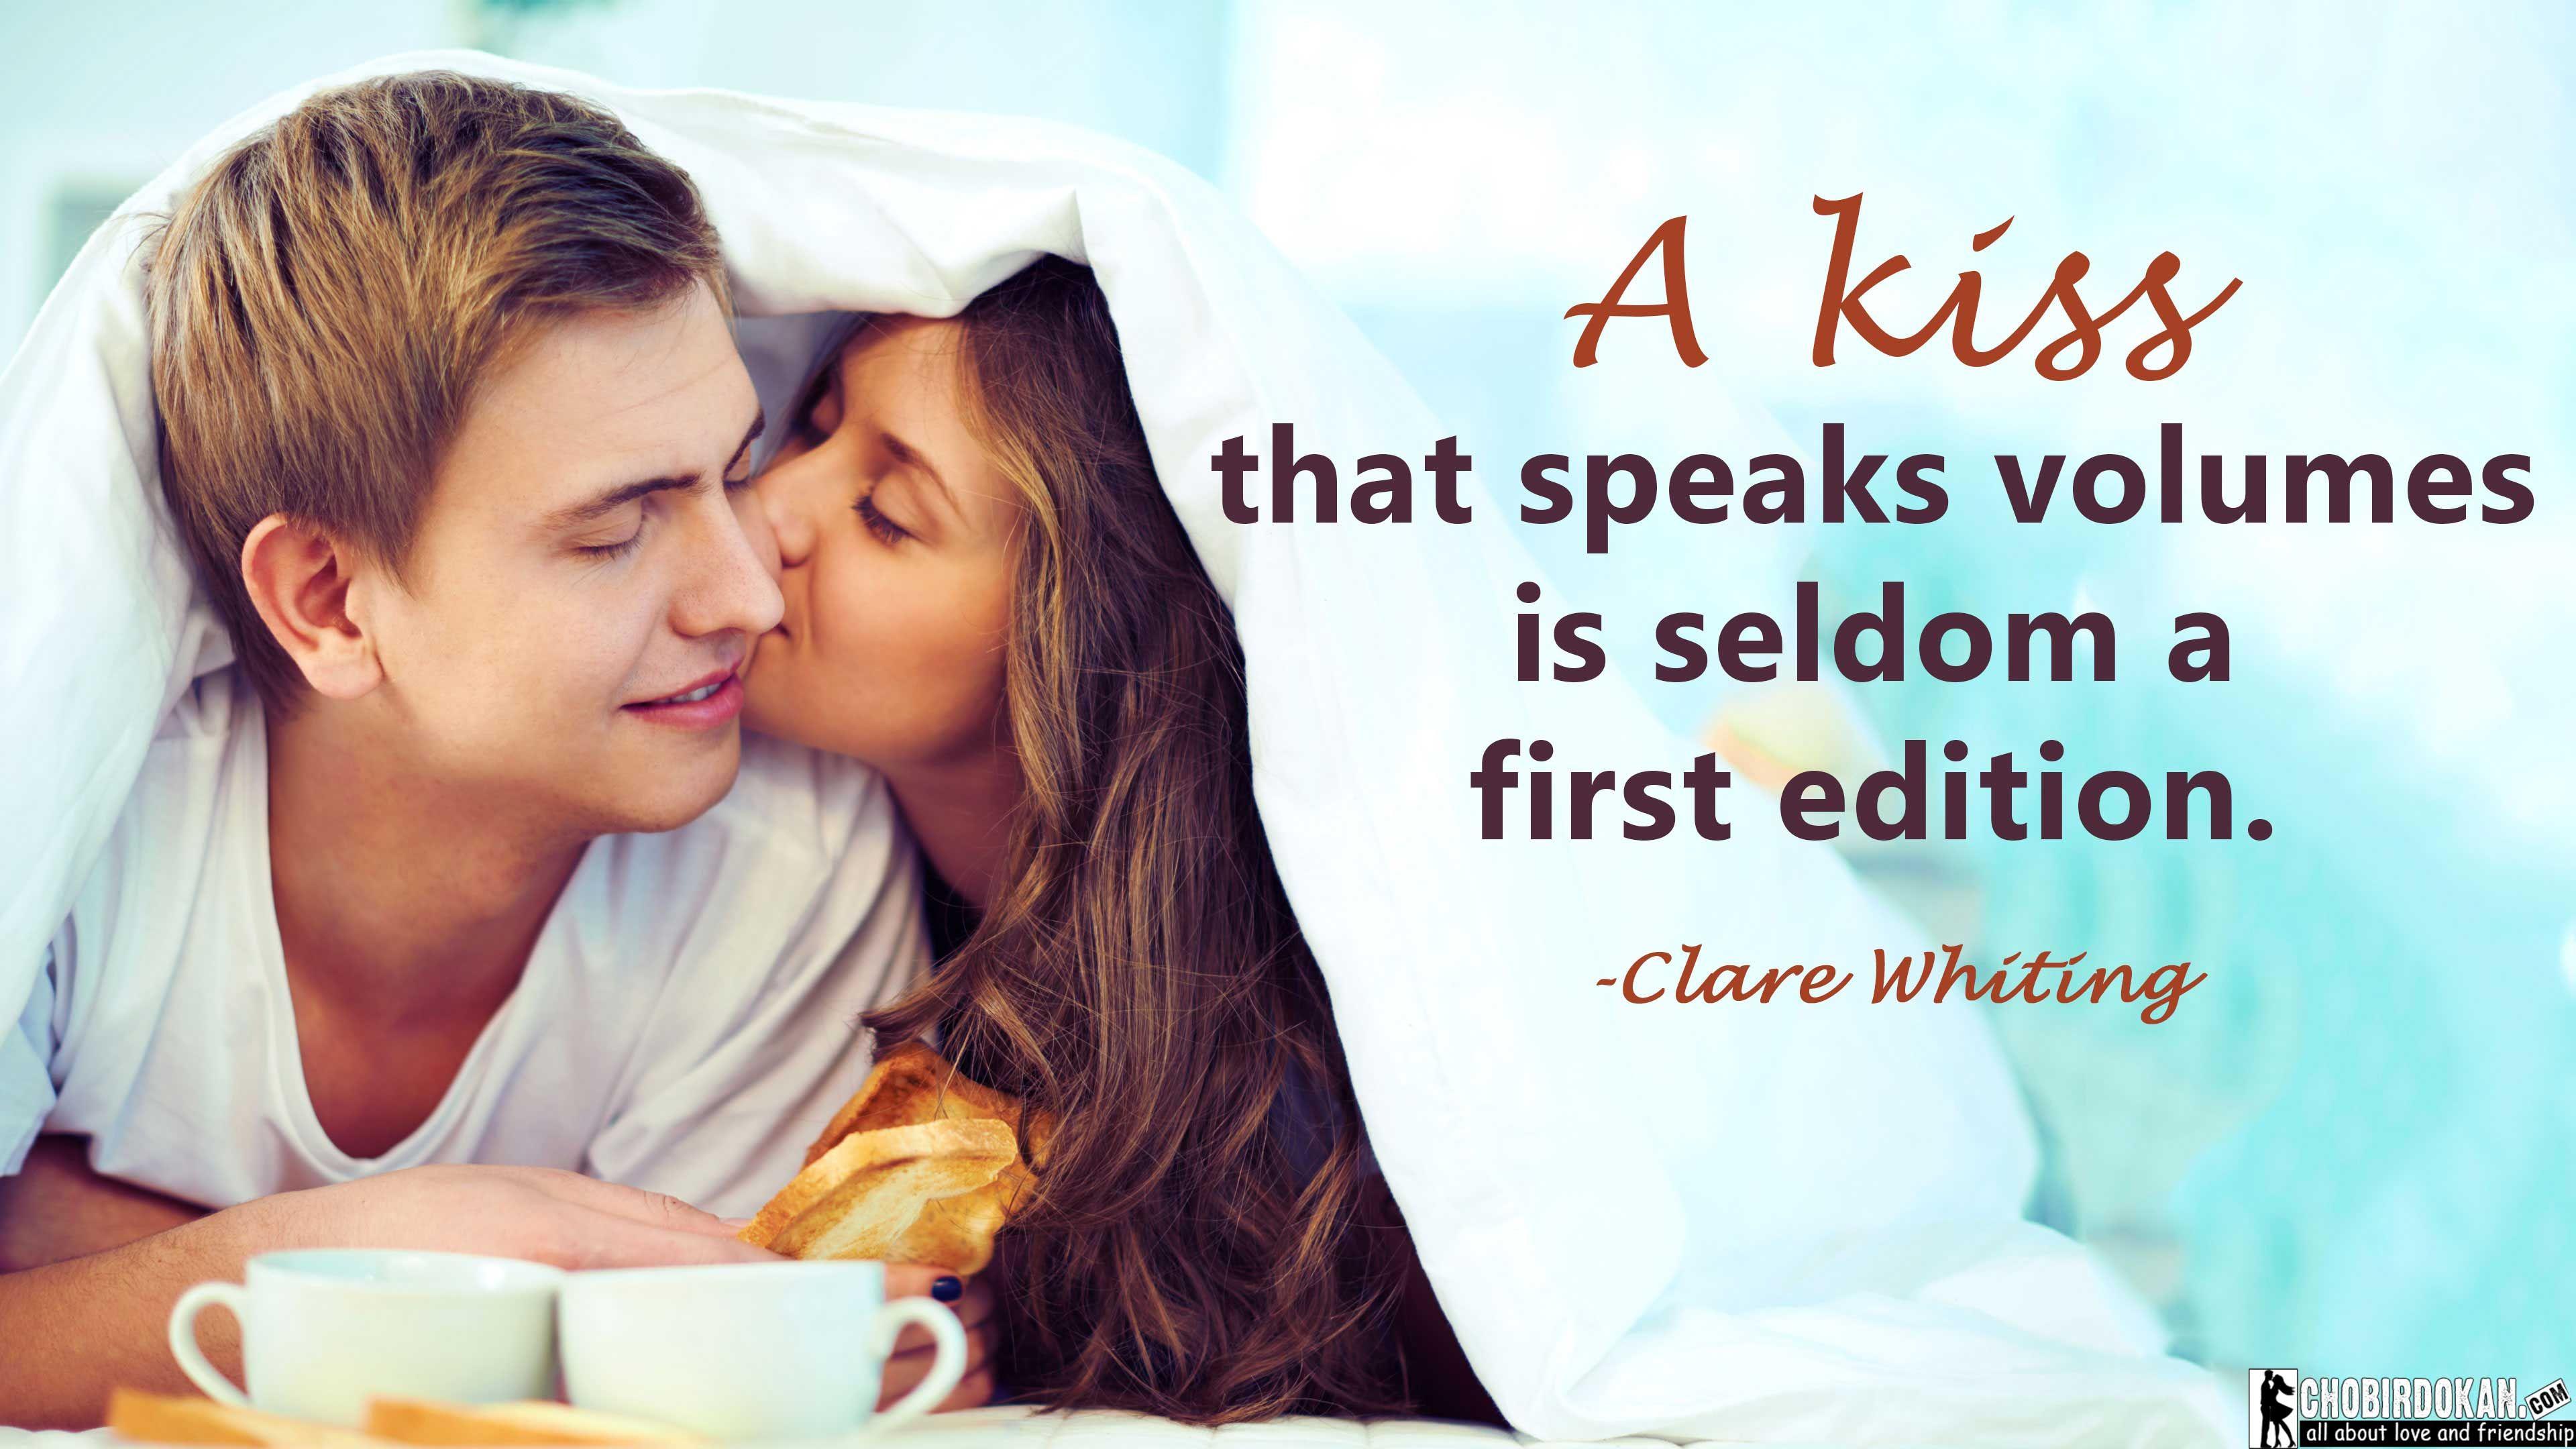 cute kissing images with quotes